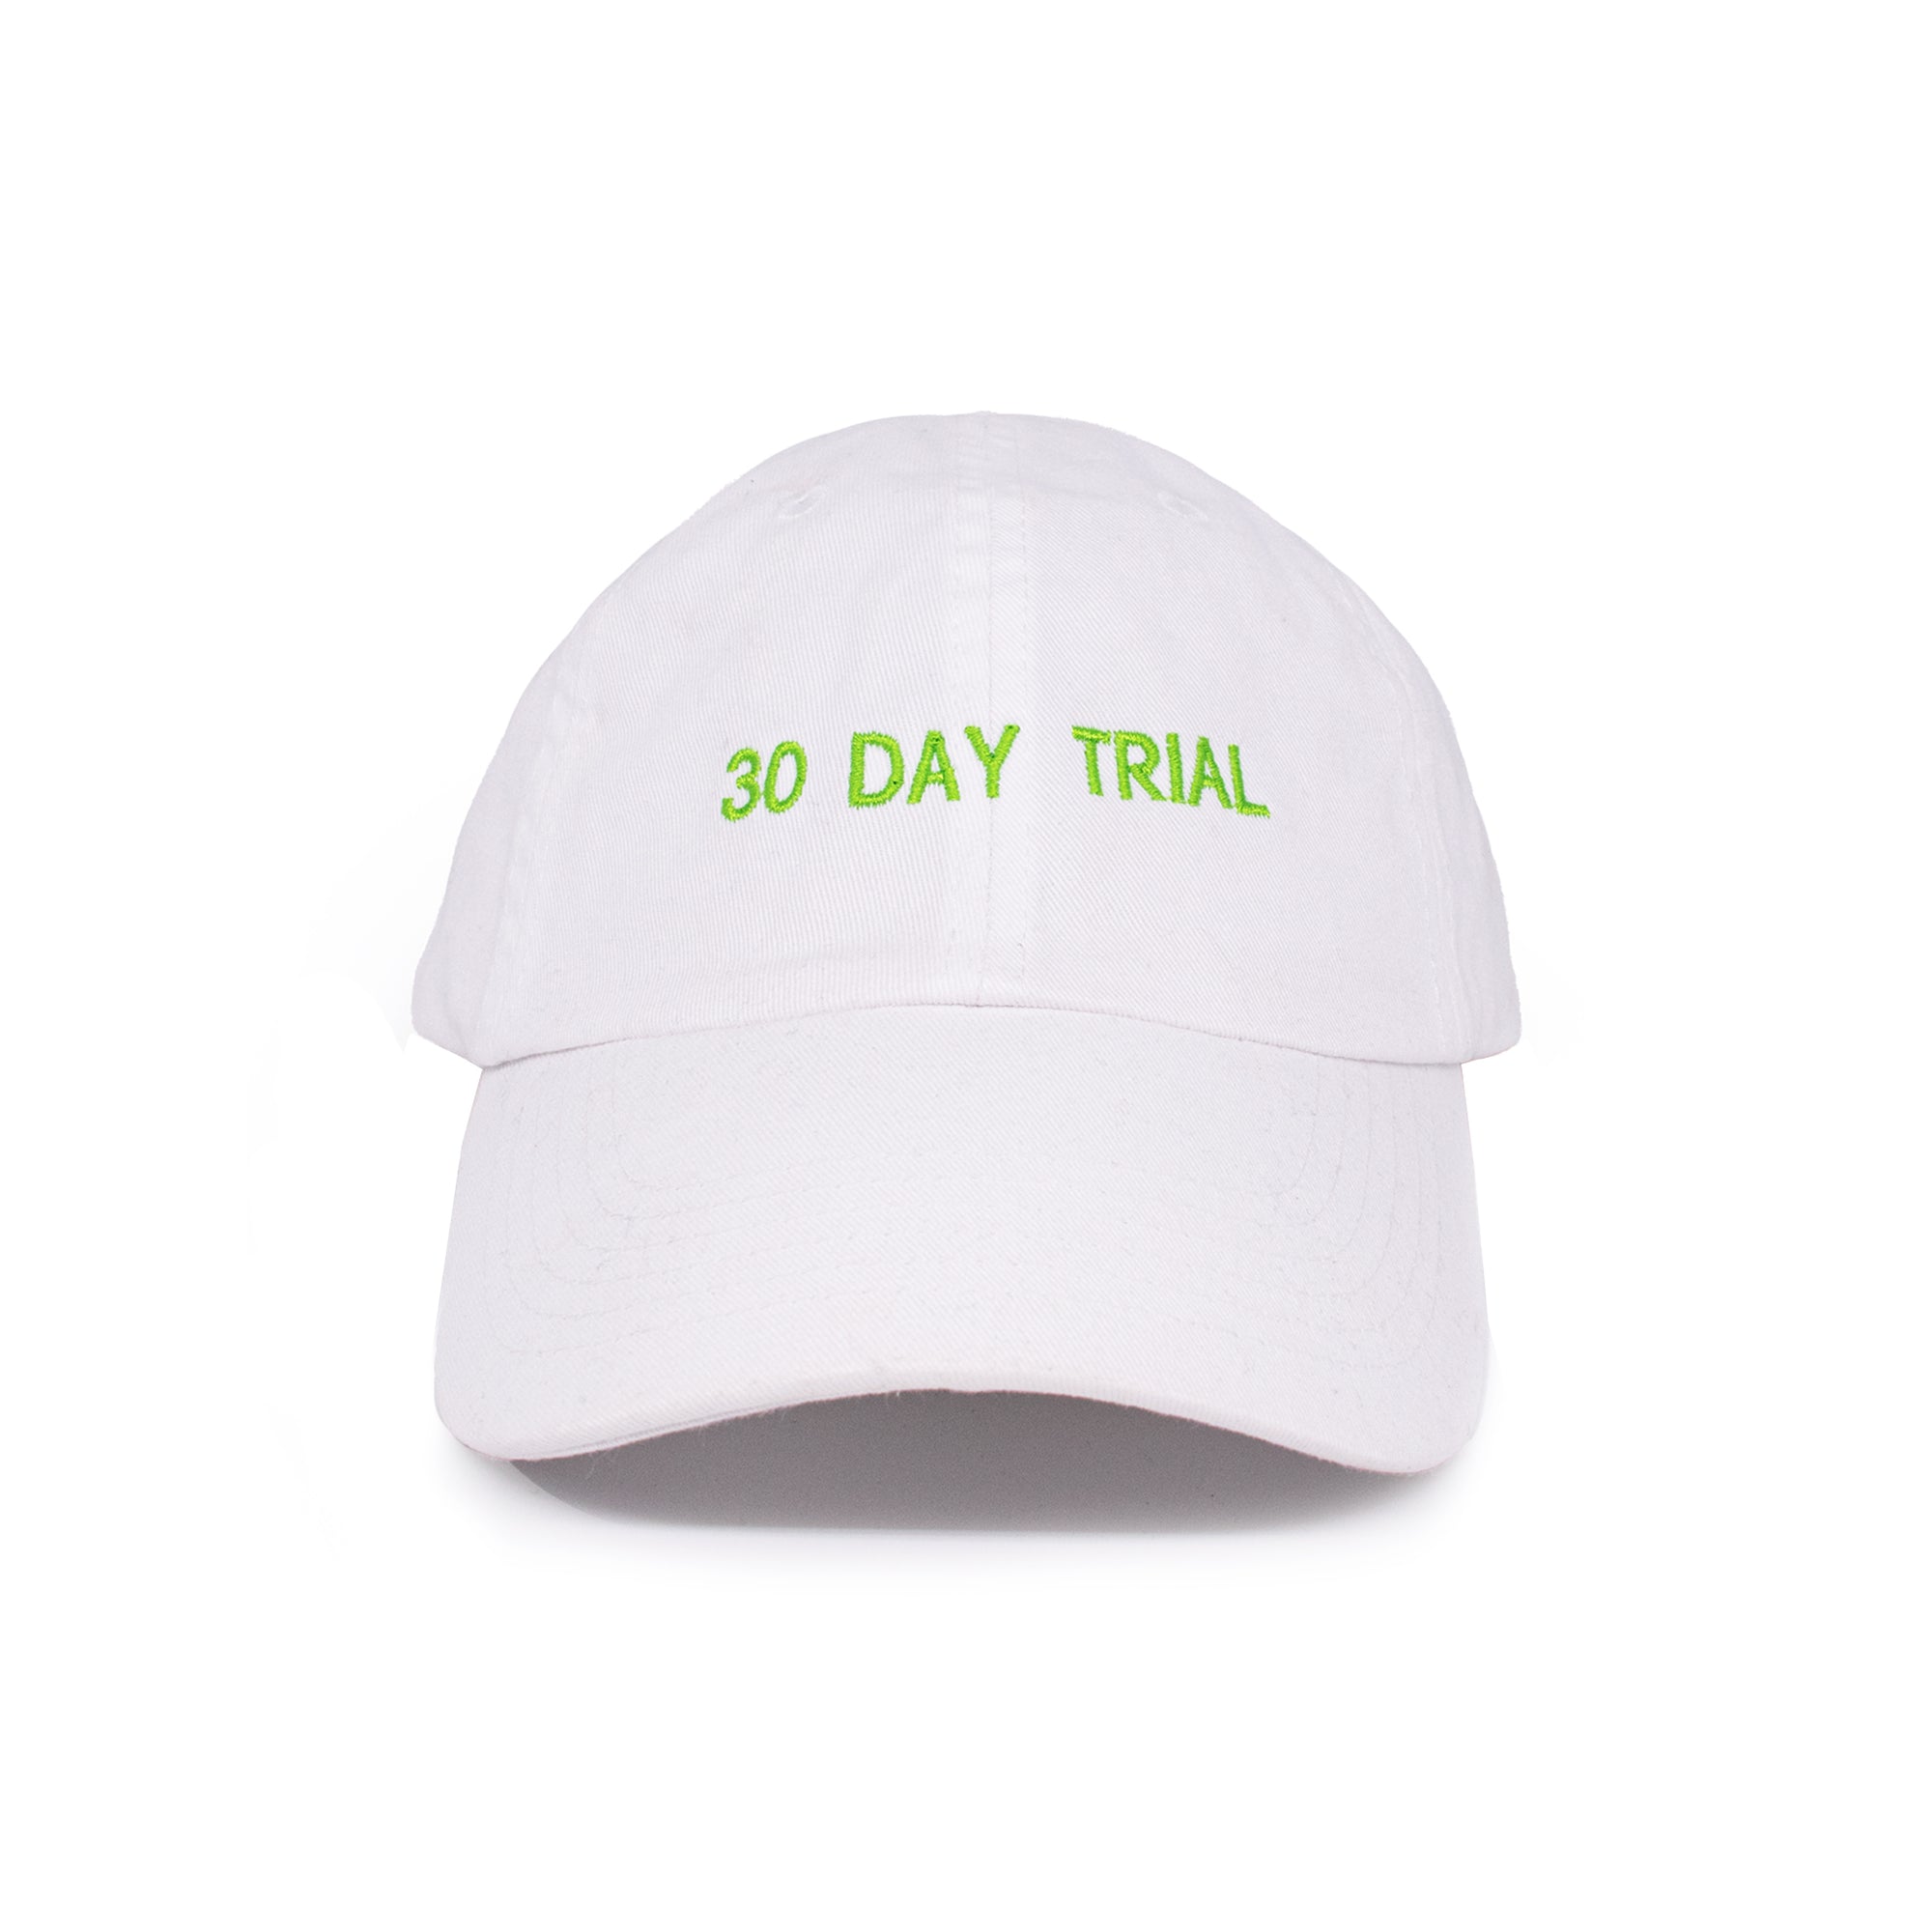 30 DAY TRIAL HAT